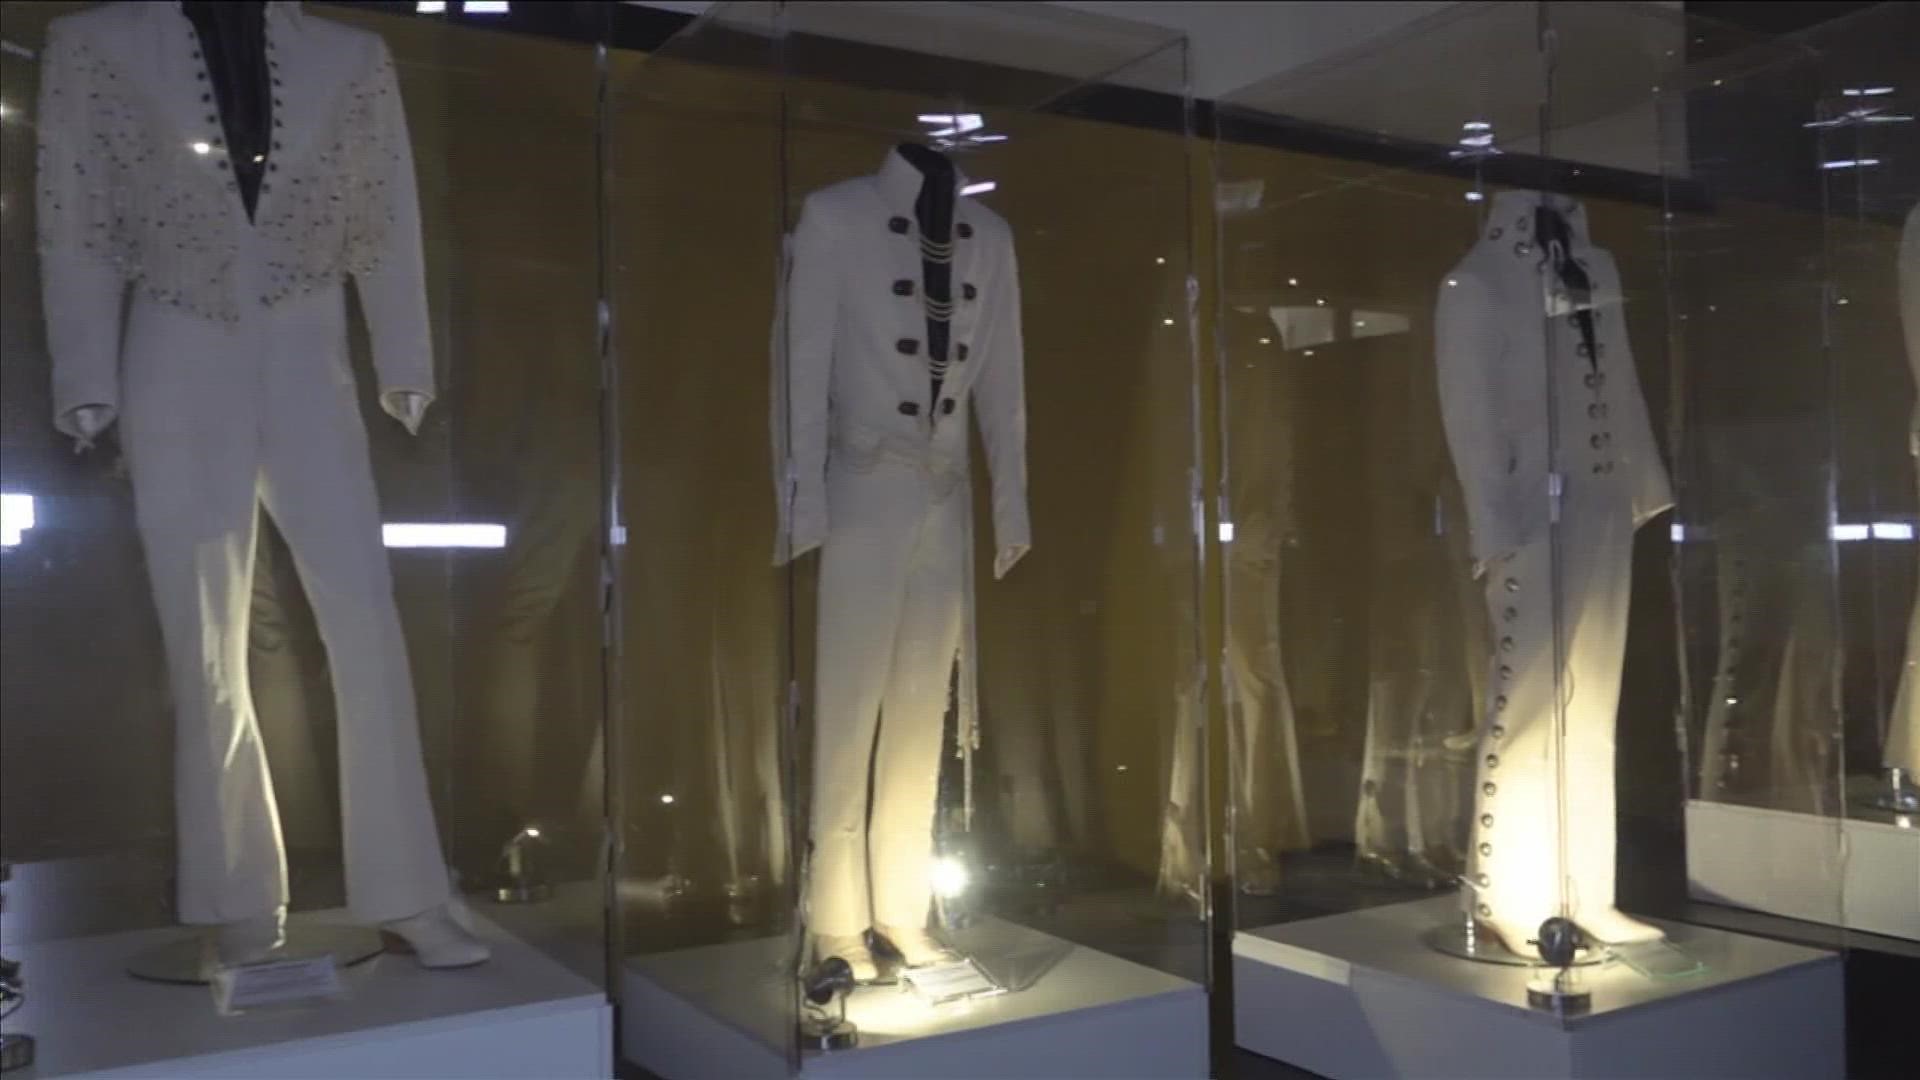 Graceland announced that the limited-time exhibit includes a 21-foot floor to ceiling display of Elvis’ “iconic” costumes.